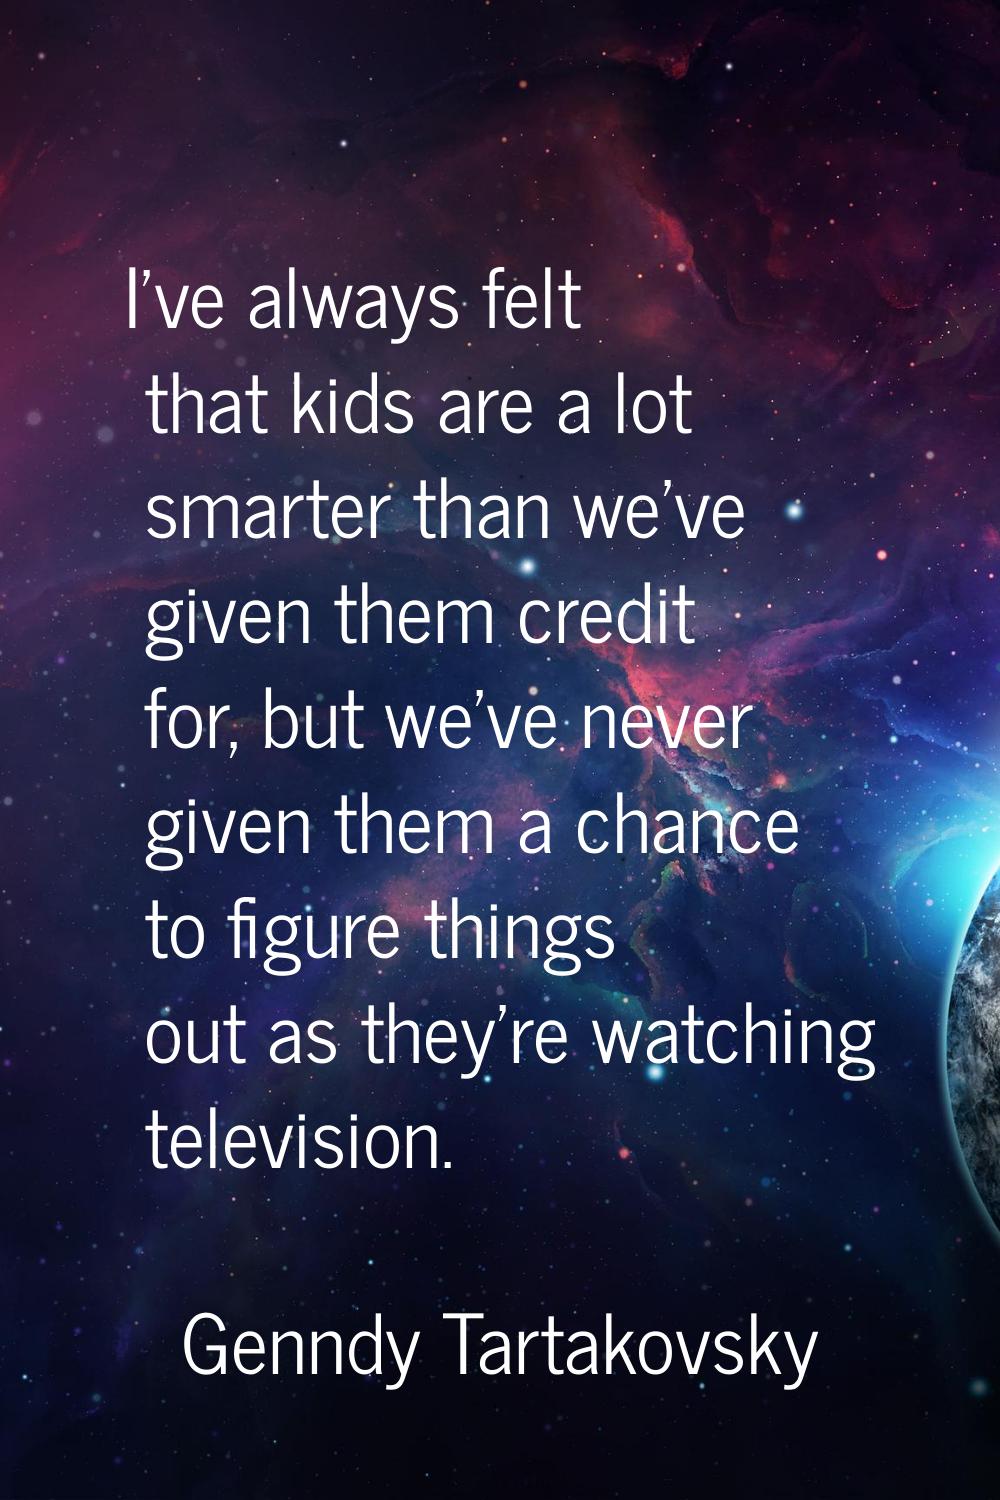 I've always felt that kids are a lot smarter than we've given them credit for, but we've never give